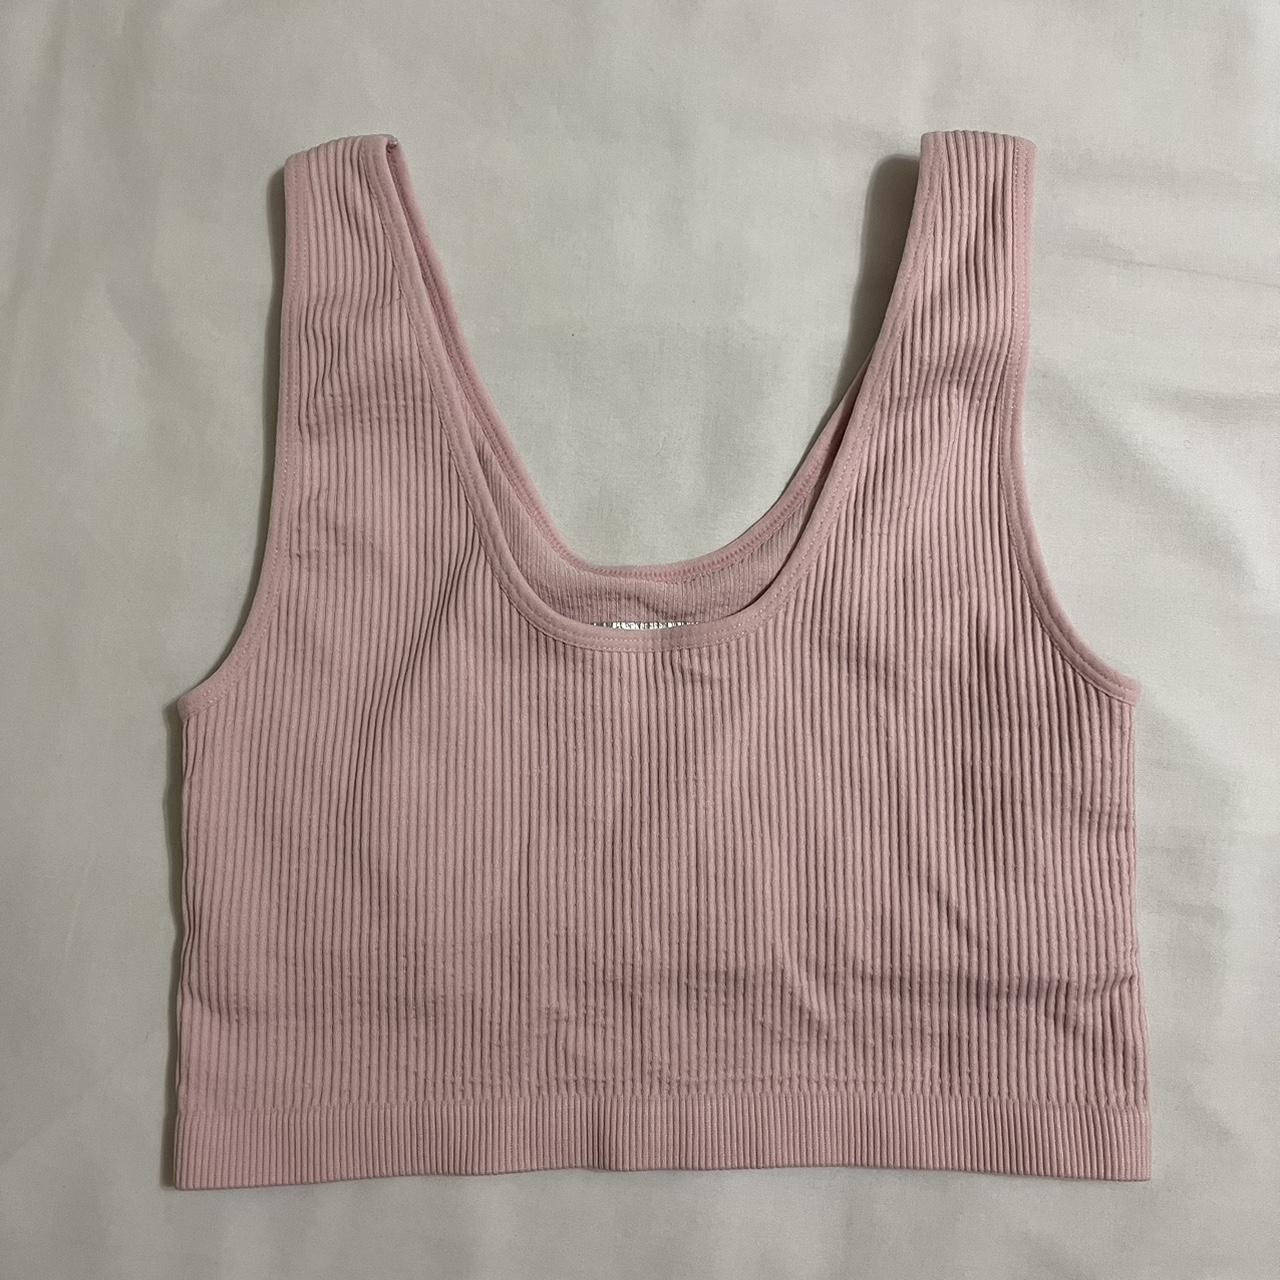 Baby pink ribbed workout top from Forever21! Has an... - Depop